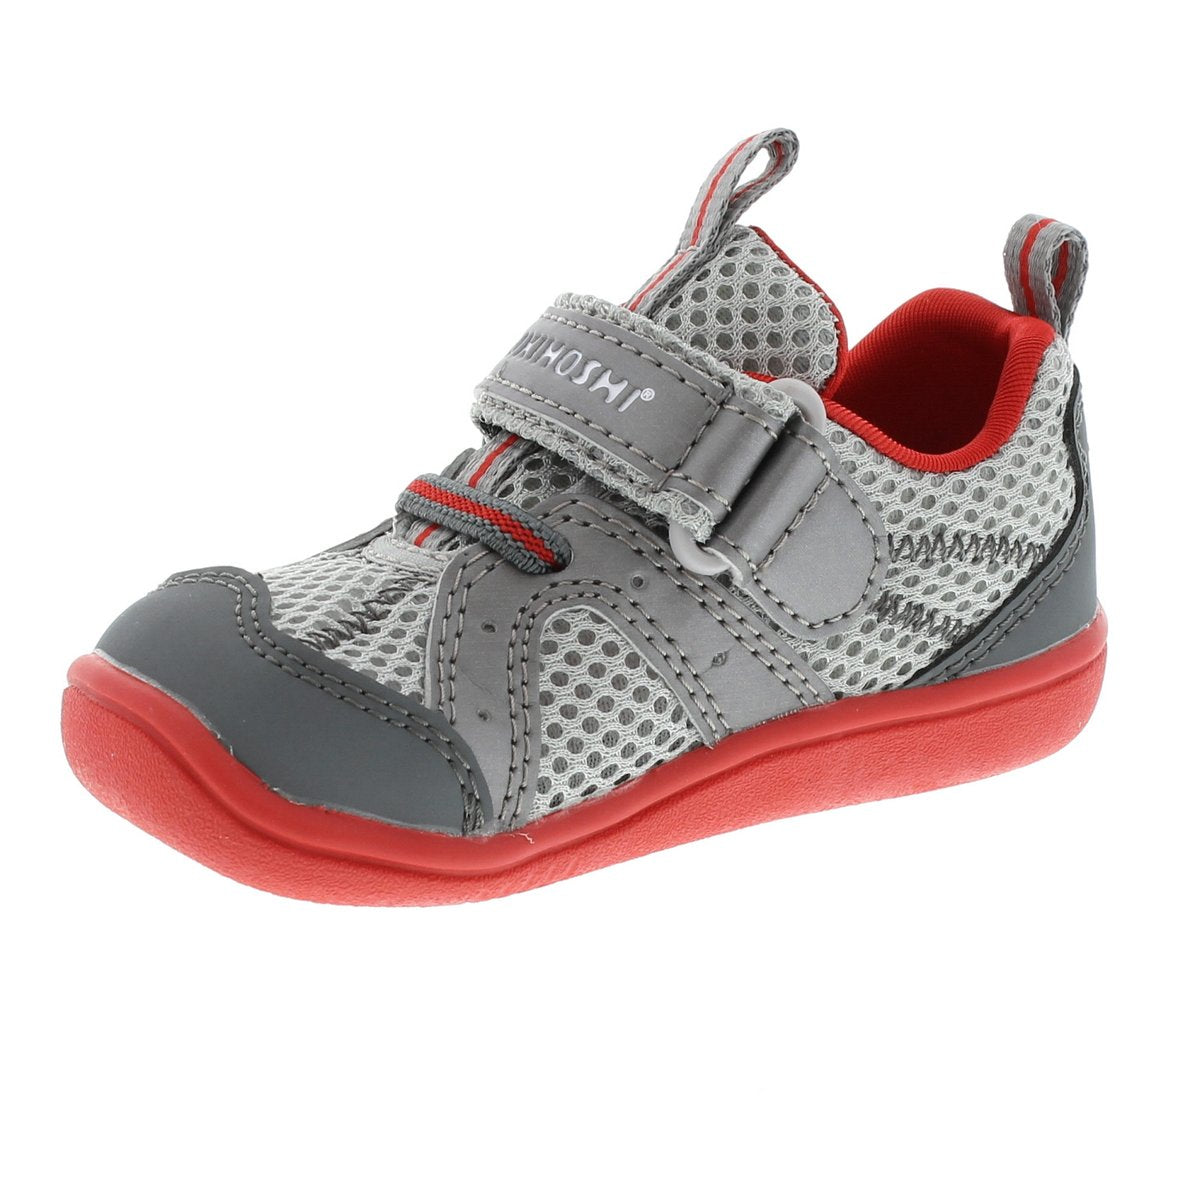 Baby Tsukihoshi Marina Sneaker in Steel/Red from the front view